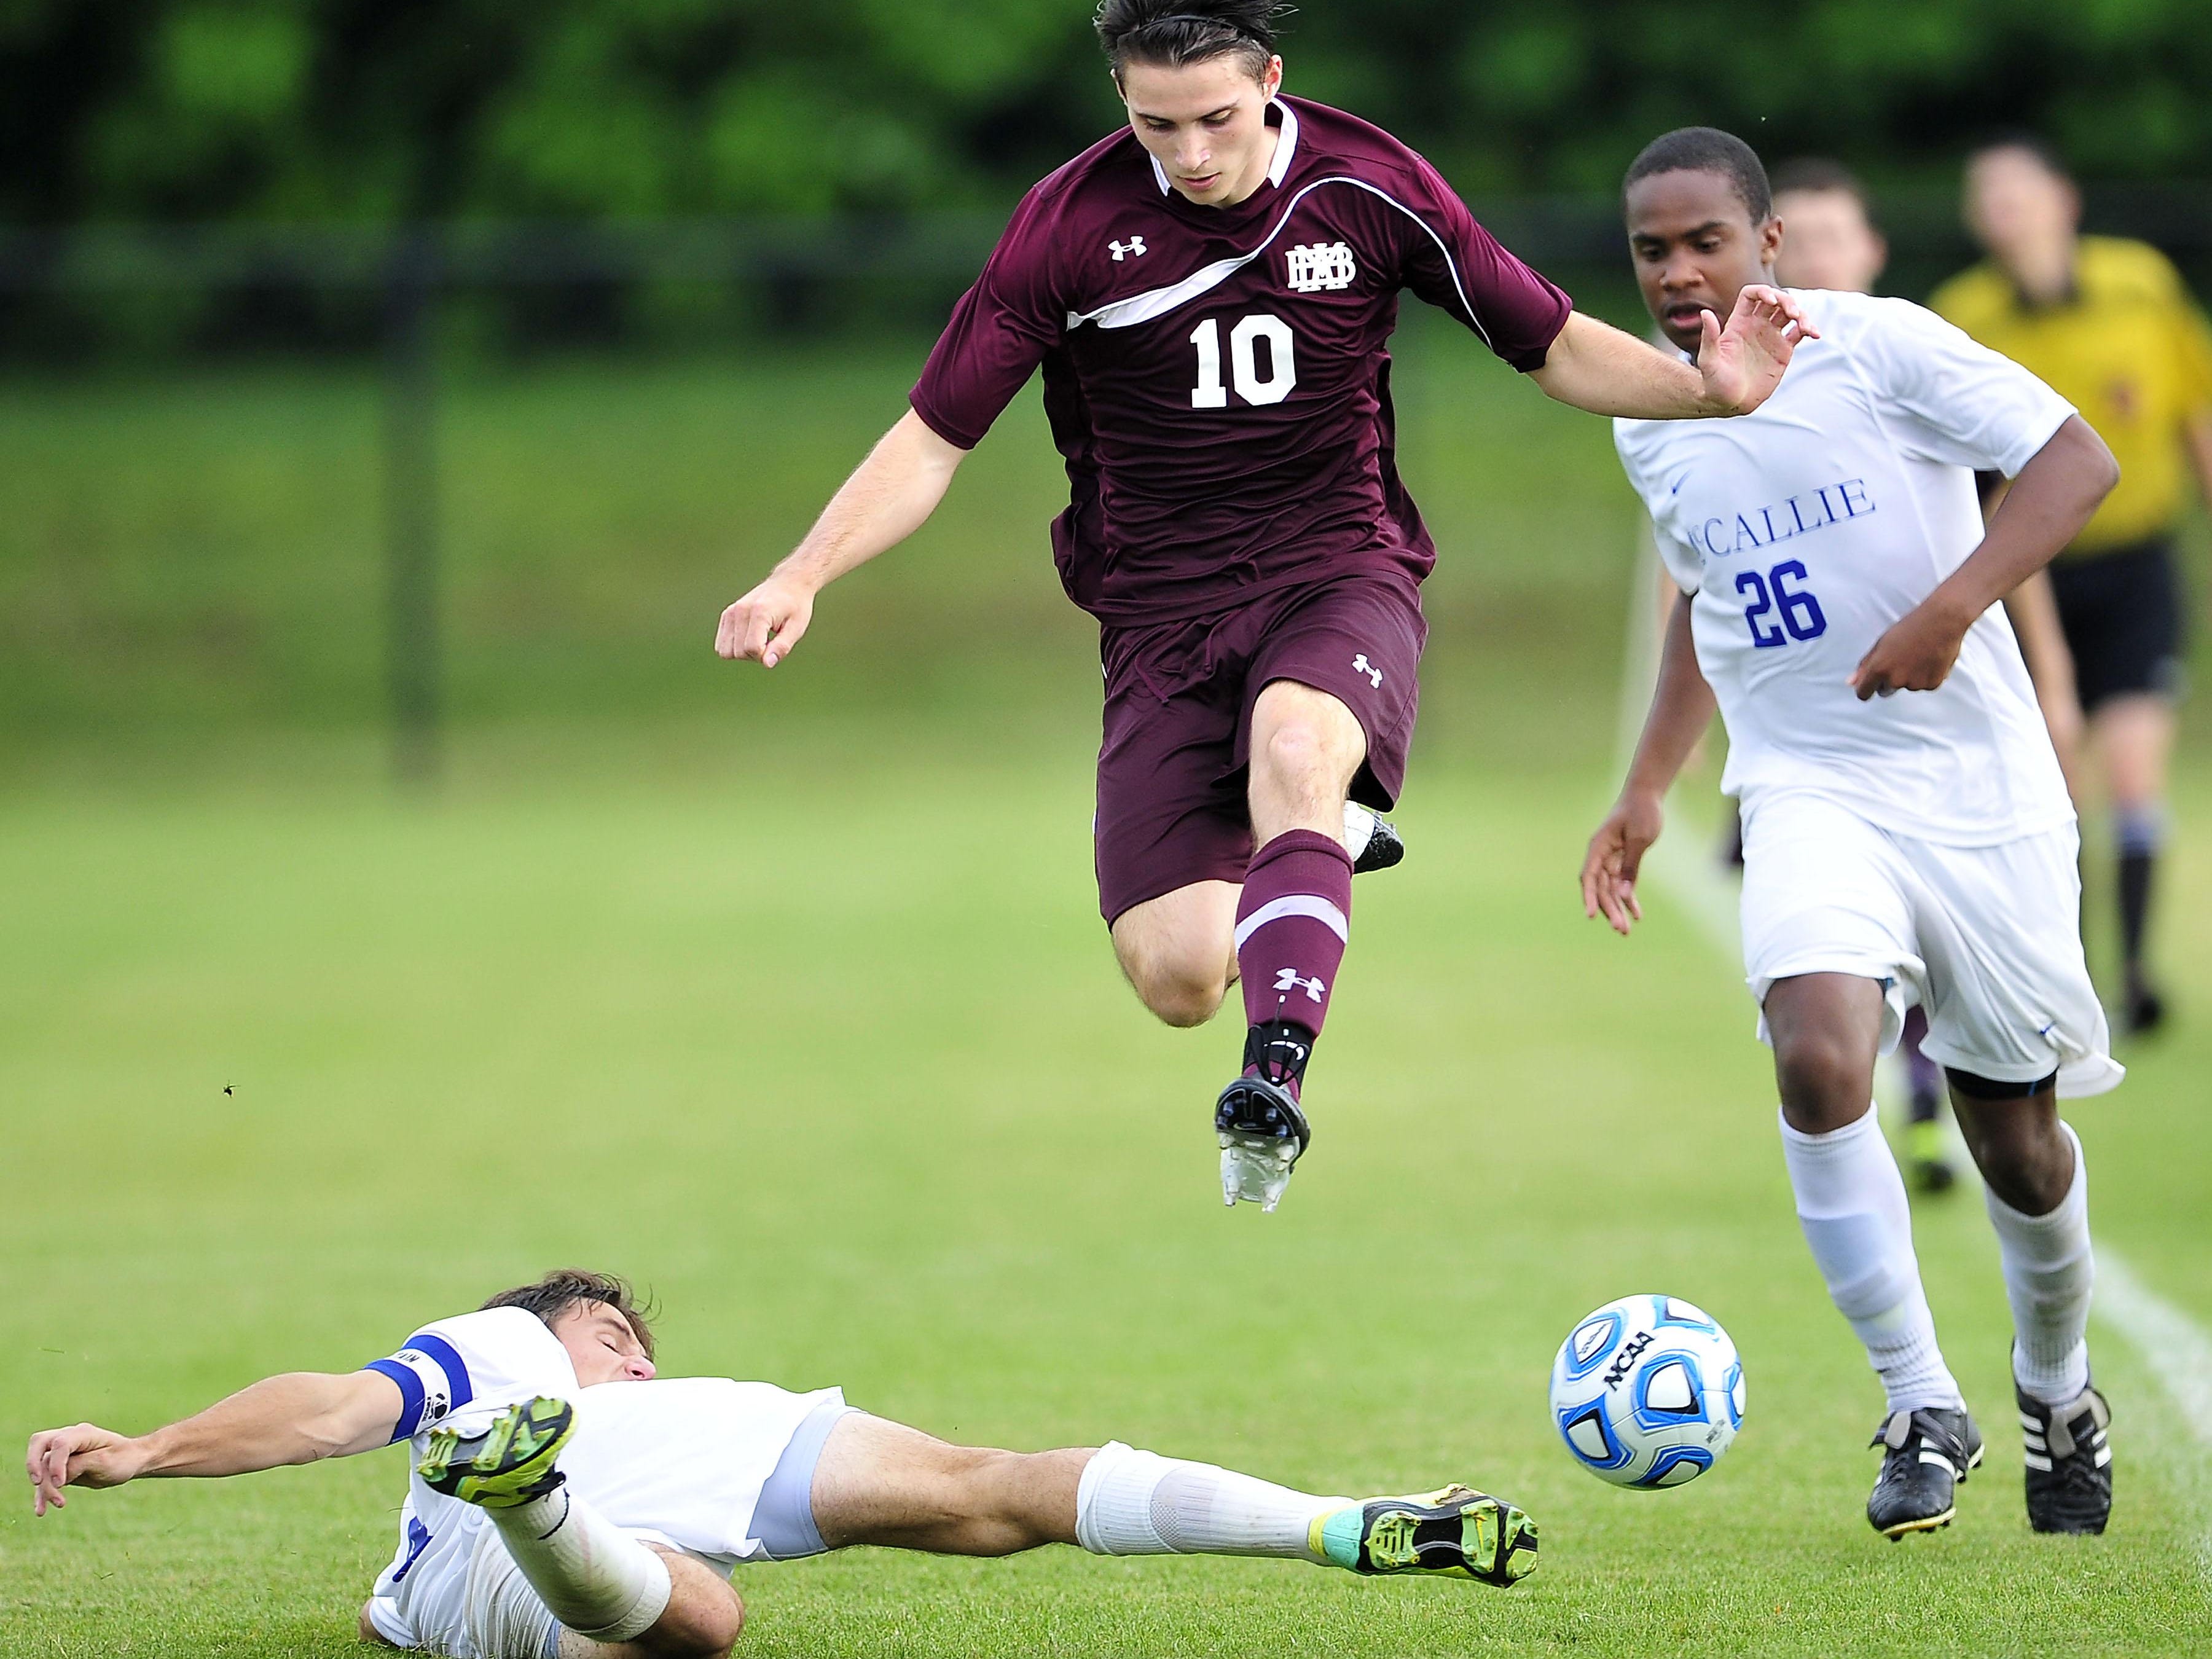 Boys soccer player of the year: Andrew Conwell | USA TODAY High School